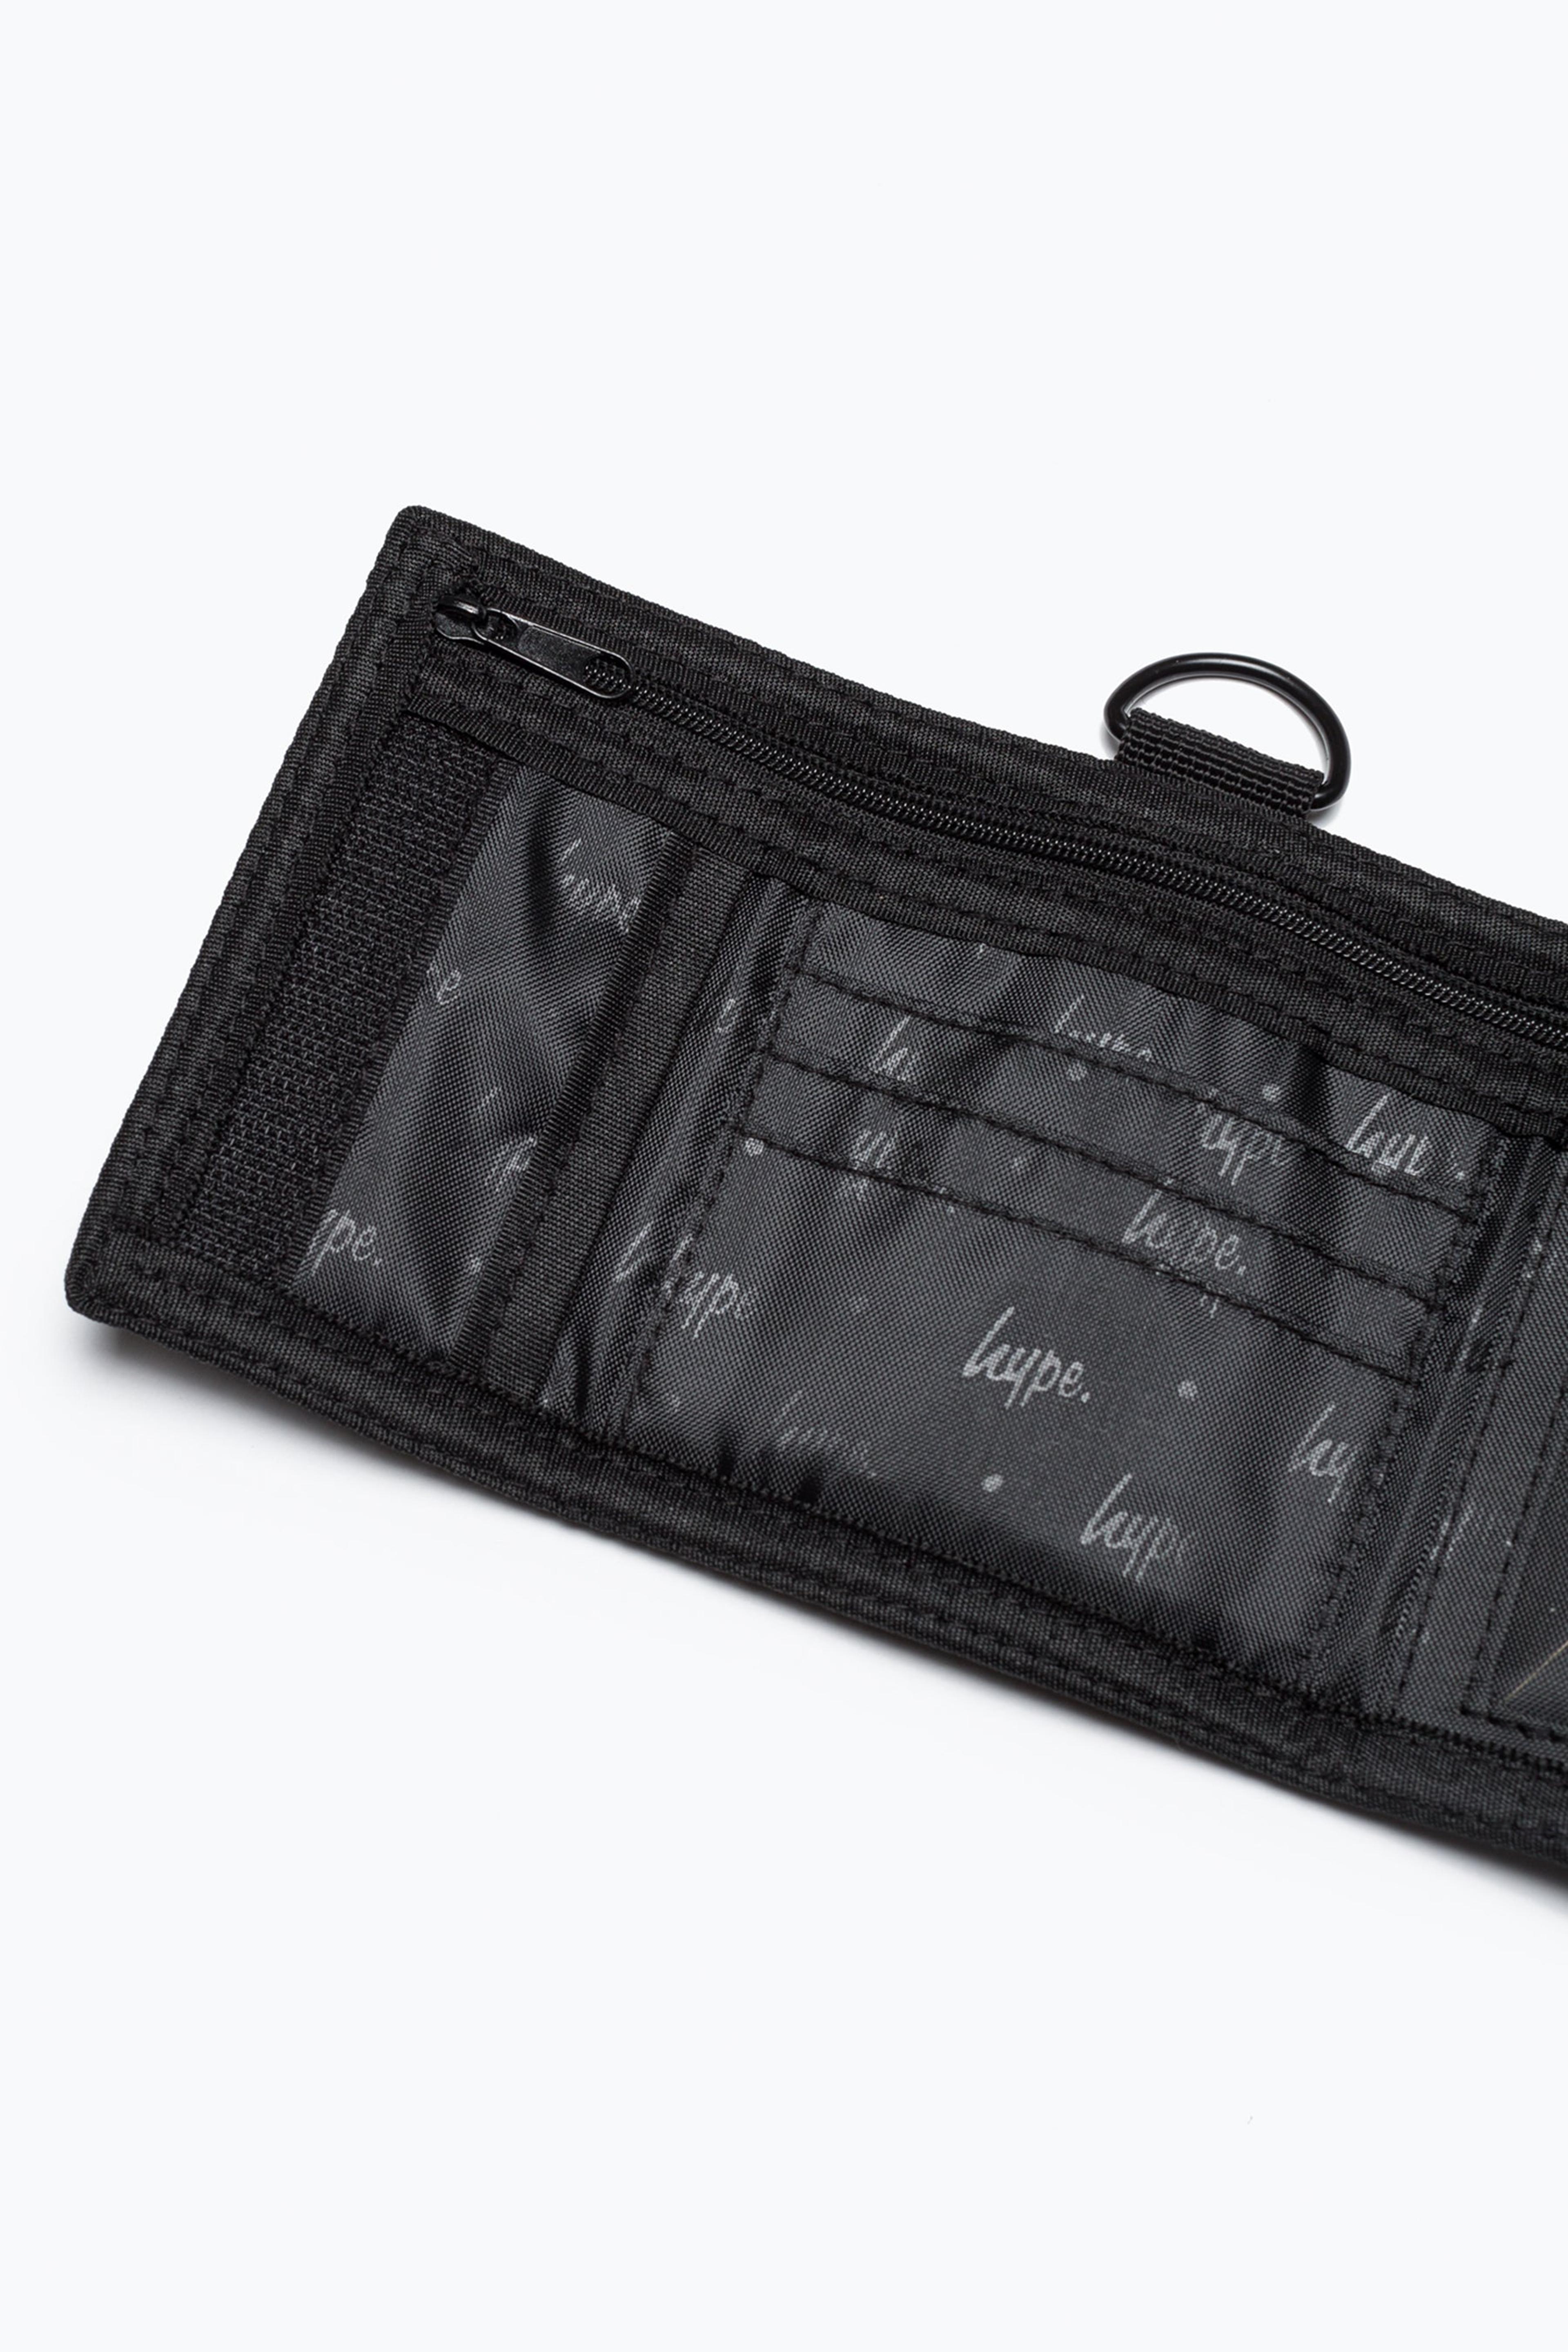 Alternate View 3 of HYPE UNISEX BLACK SMOKEY STORM OUTLINE CREST WALLET